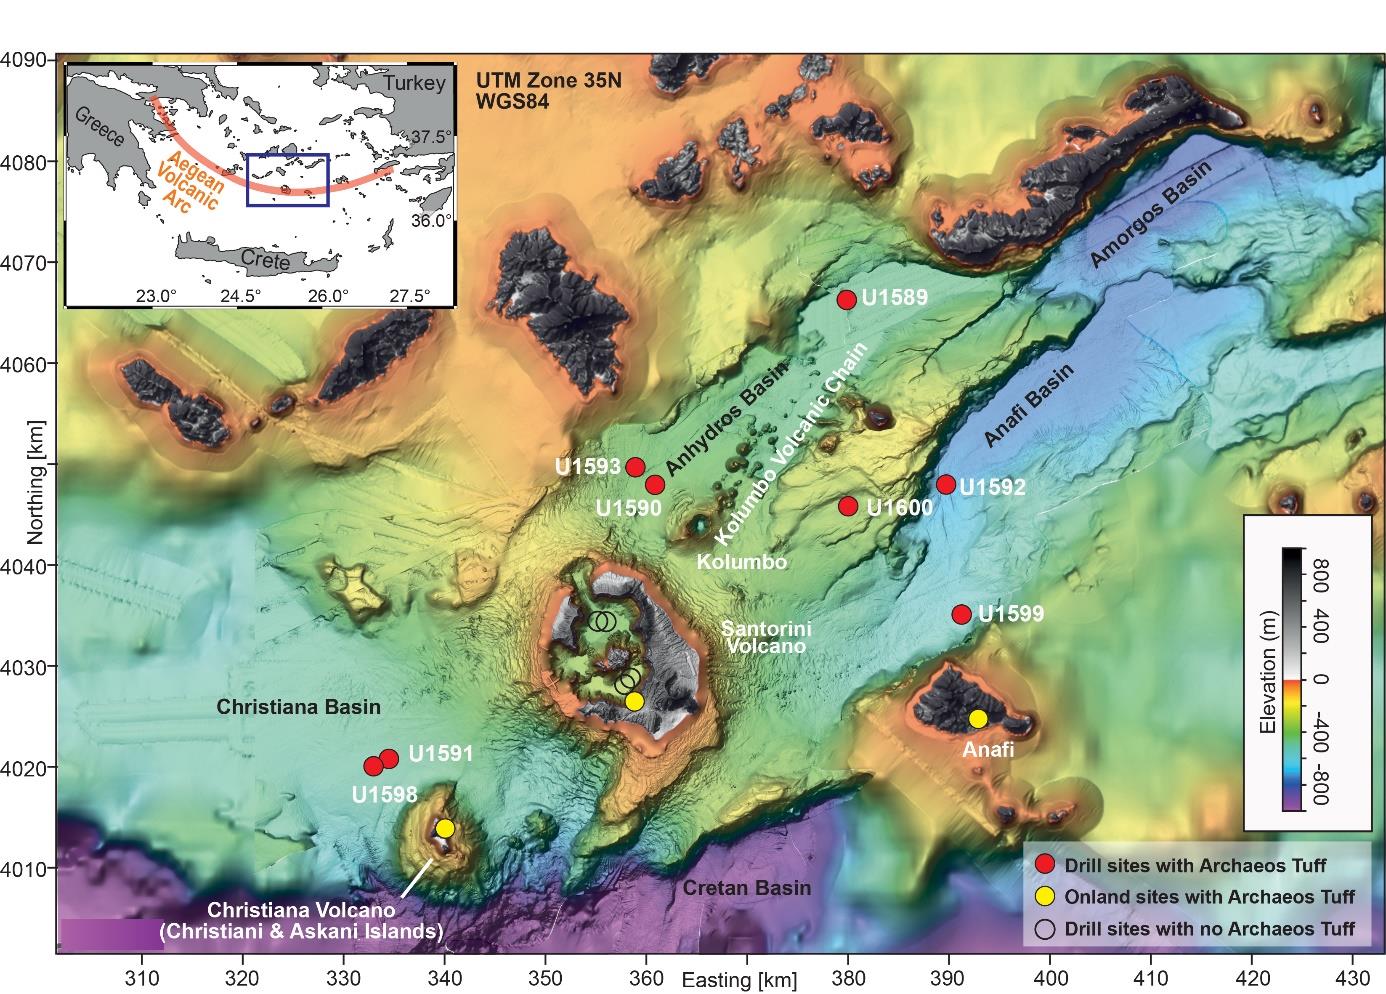 colorful map of seafloor around Santorini, showing drill sites as red dots